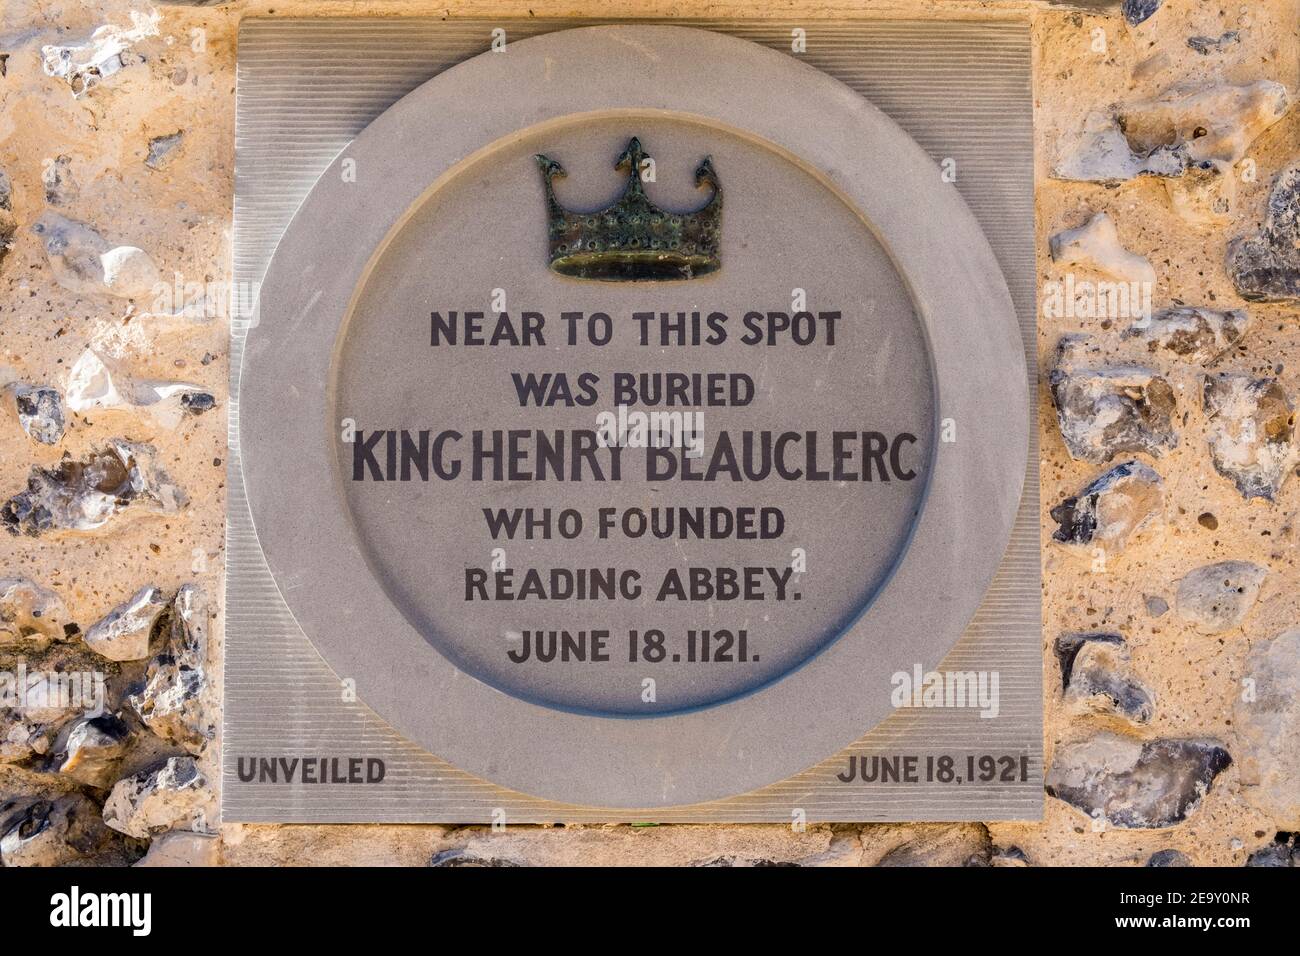 Plaque to King Henry I, Henry Beauclerc, at Reading Abbey ruins, Reading, Berkshire, England, GB, UK Stock Photo